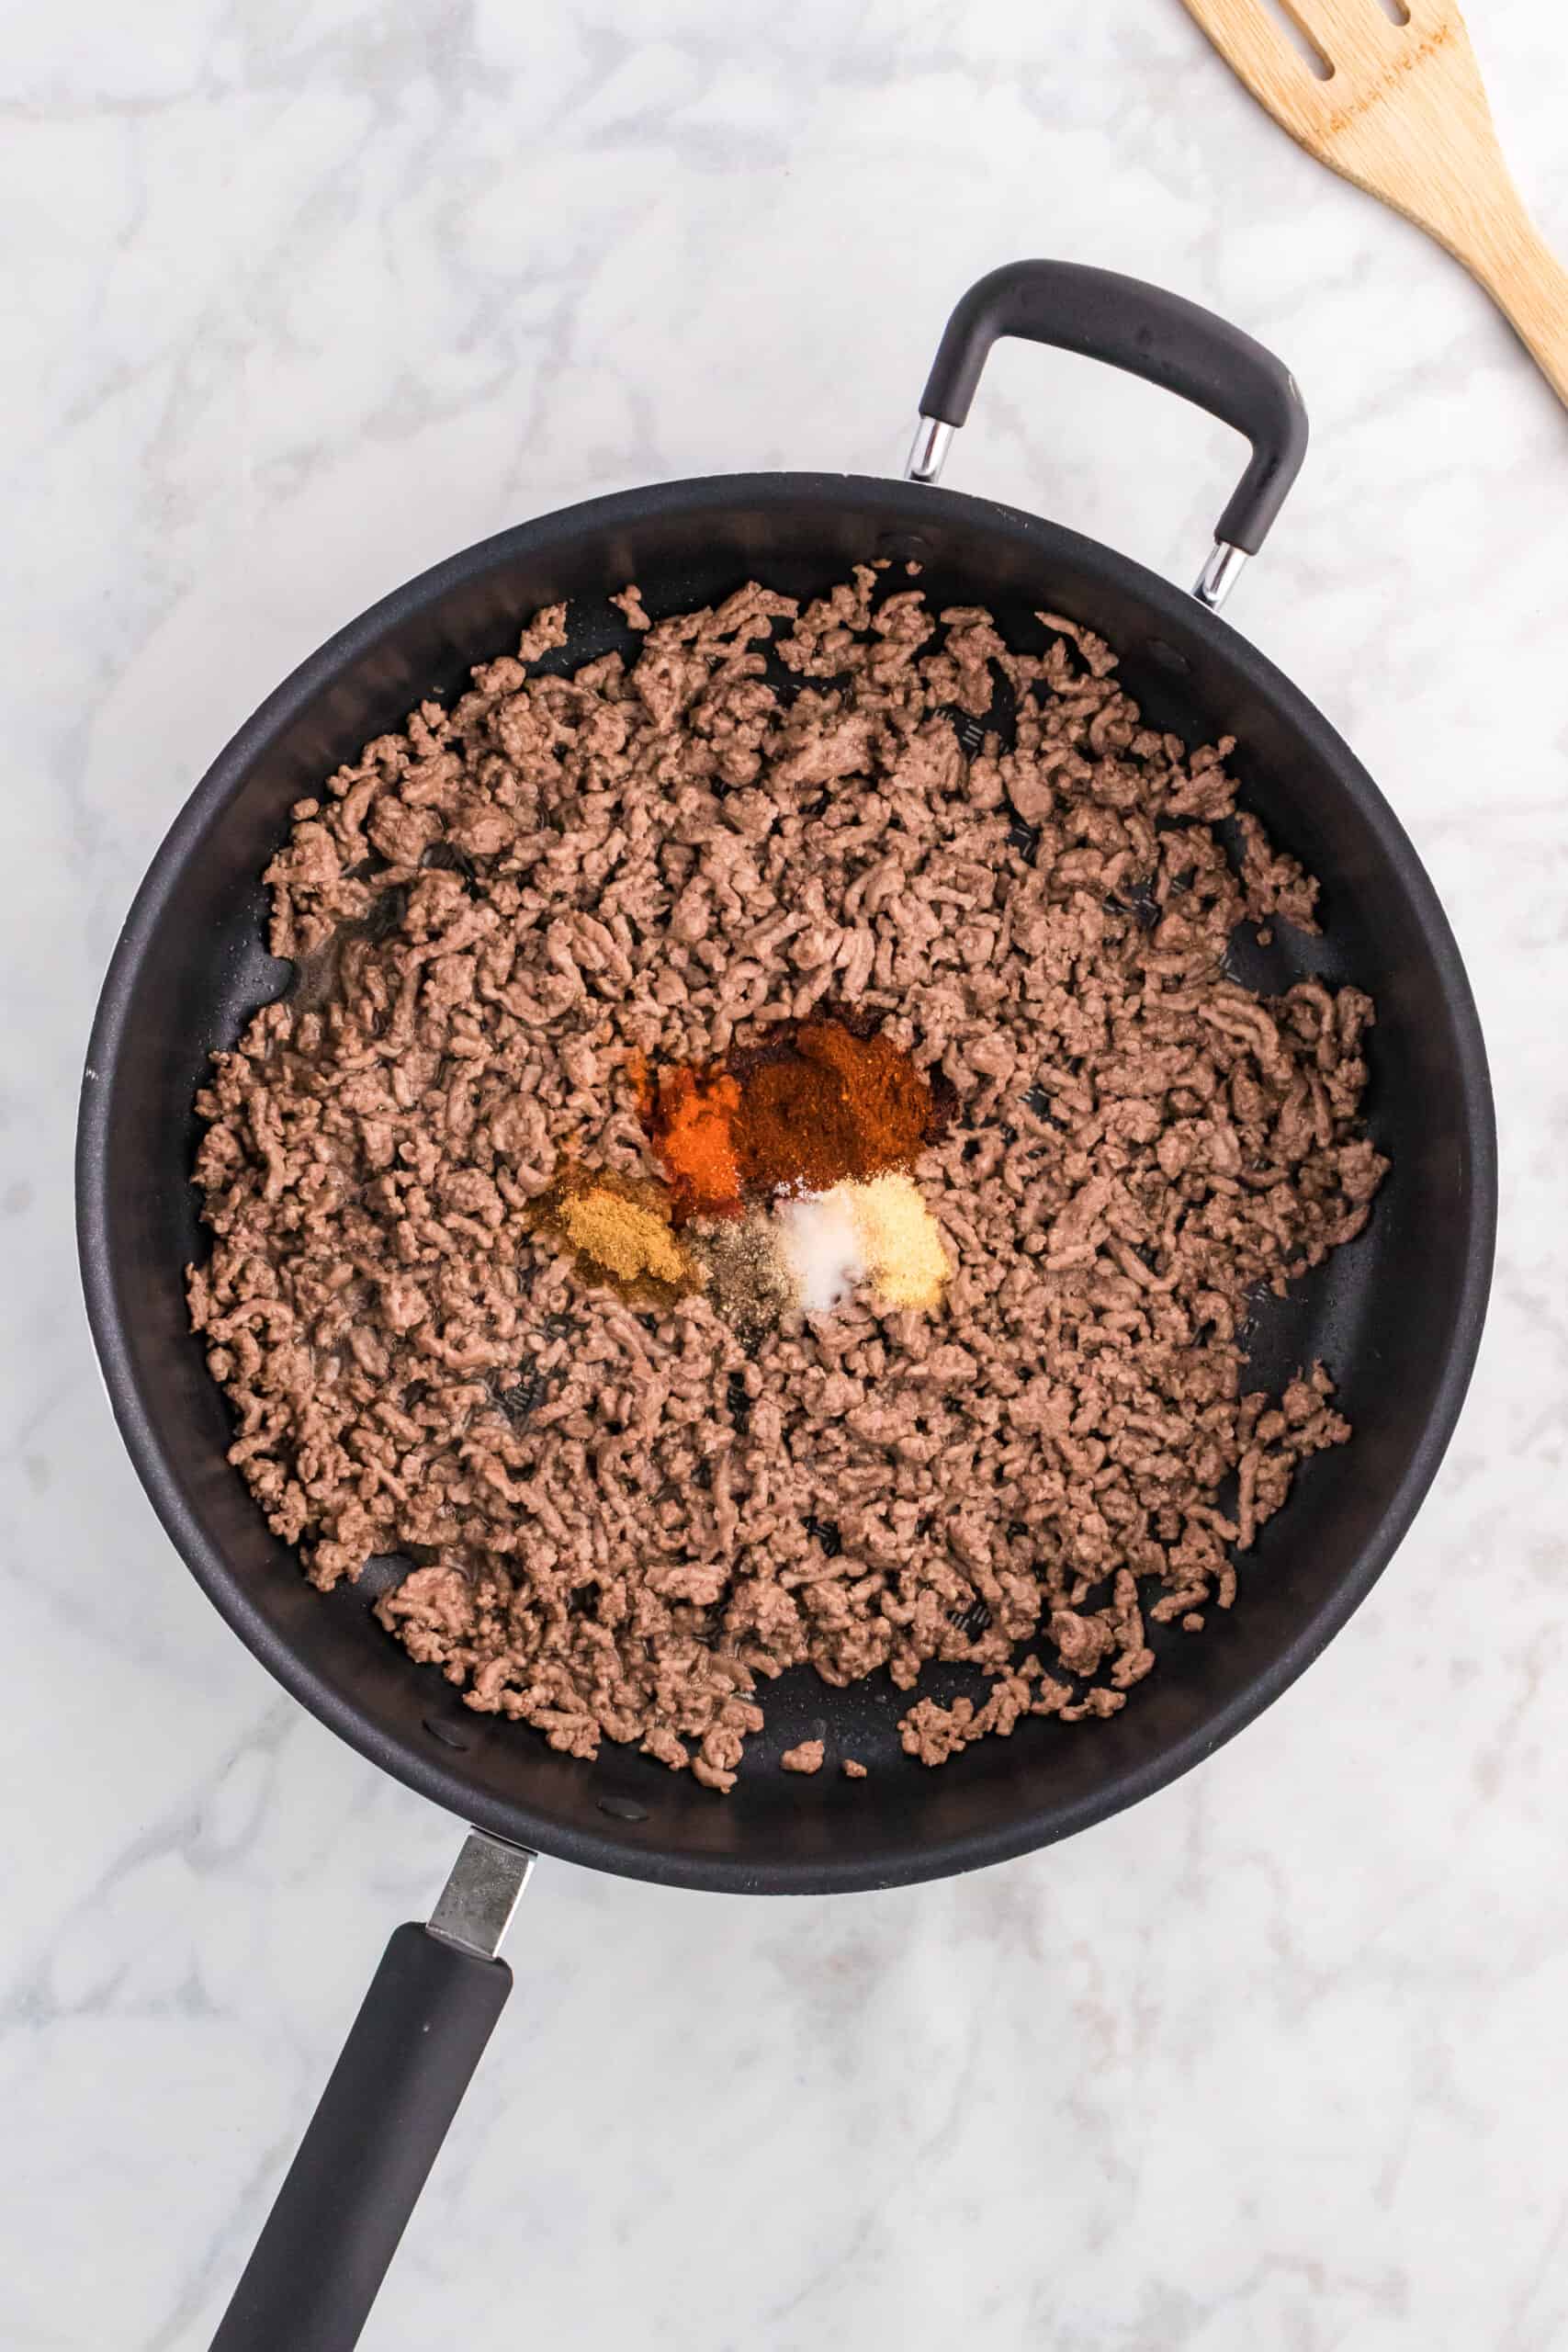 spices on top of cooked ground beef in a skillet